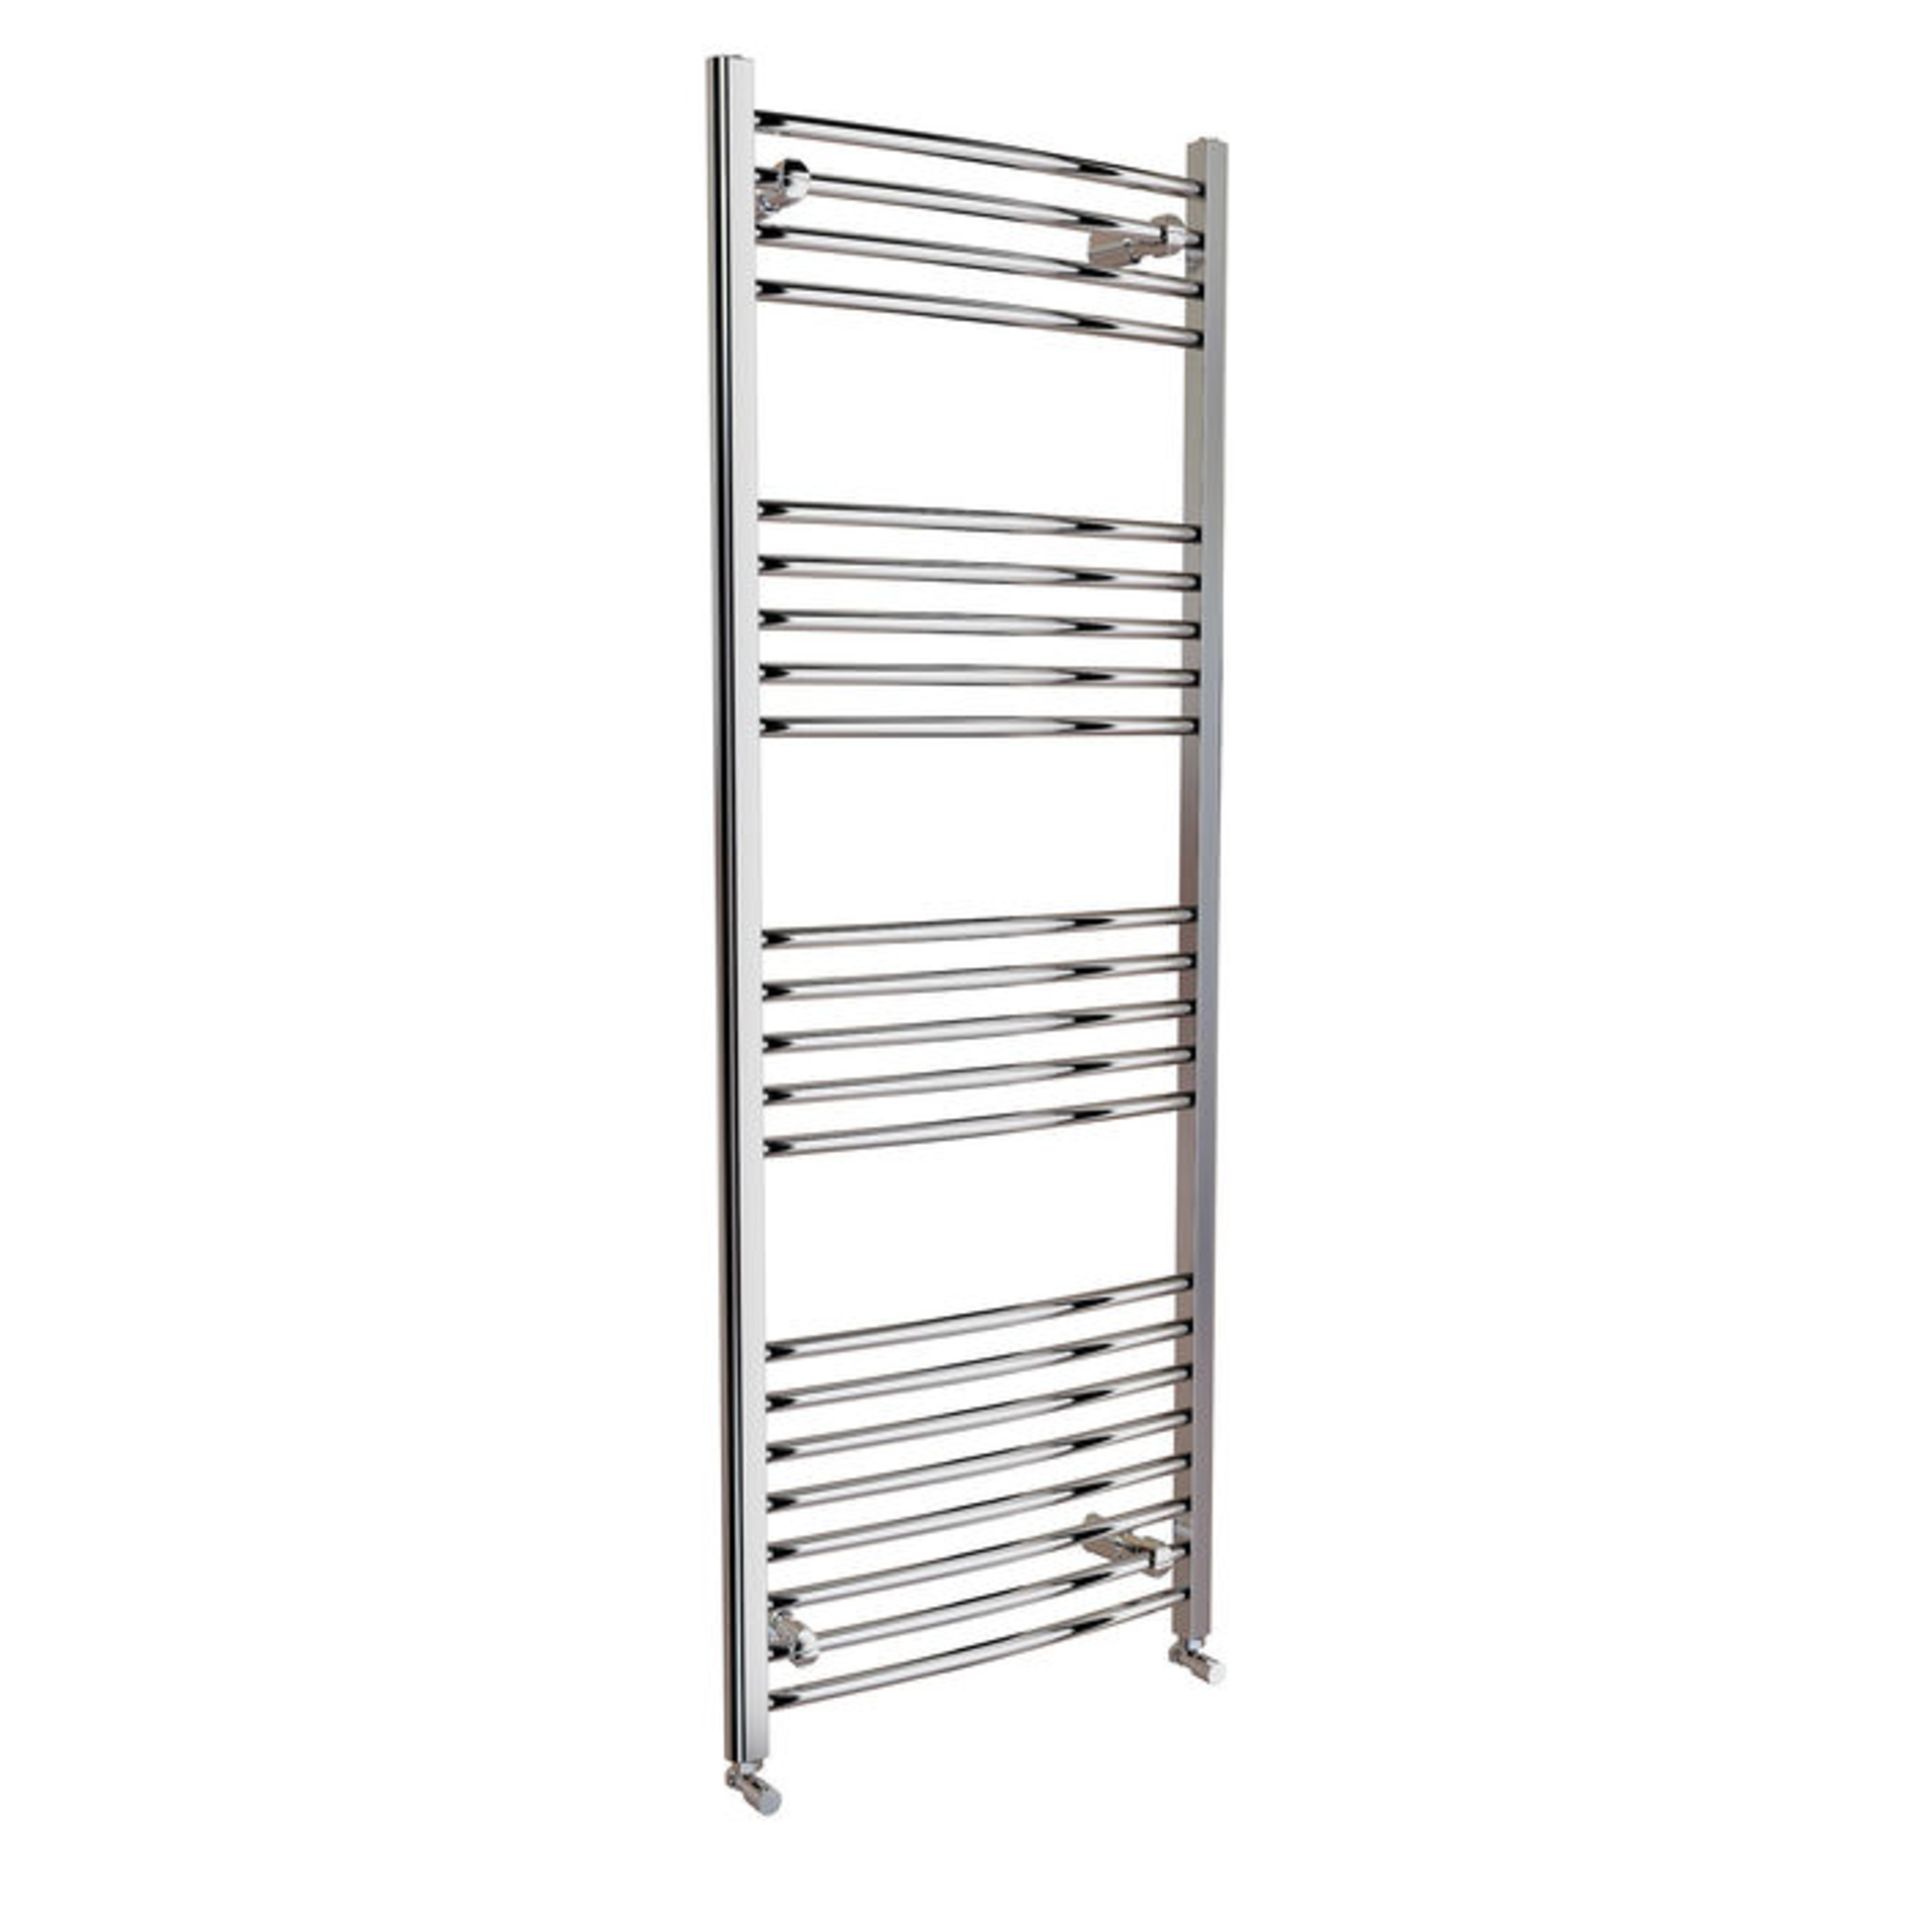 (OS222) 1600x600mm - 20mm Tubes - Chrome Curved Rail Ladder Towel Radiator. Made from chrome - Image 4 of 4